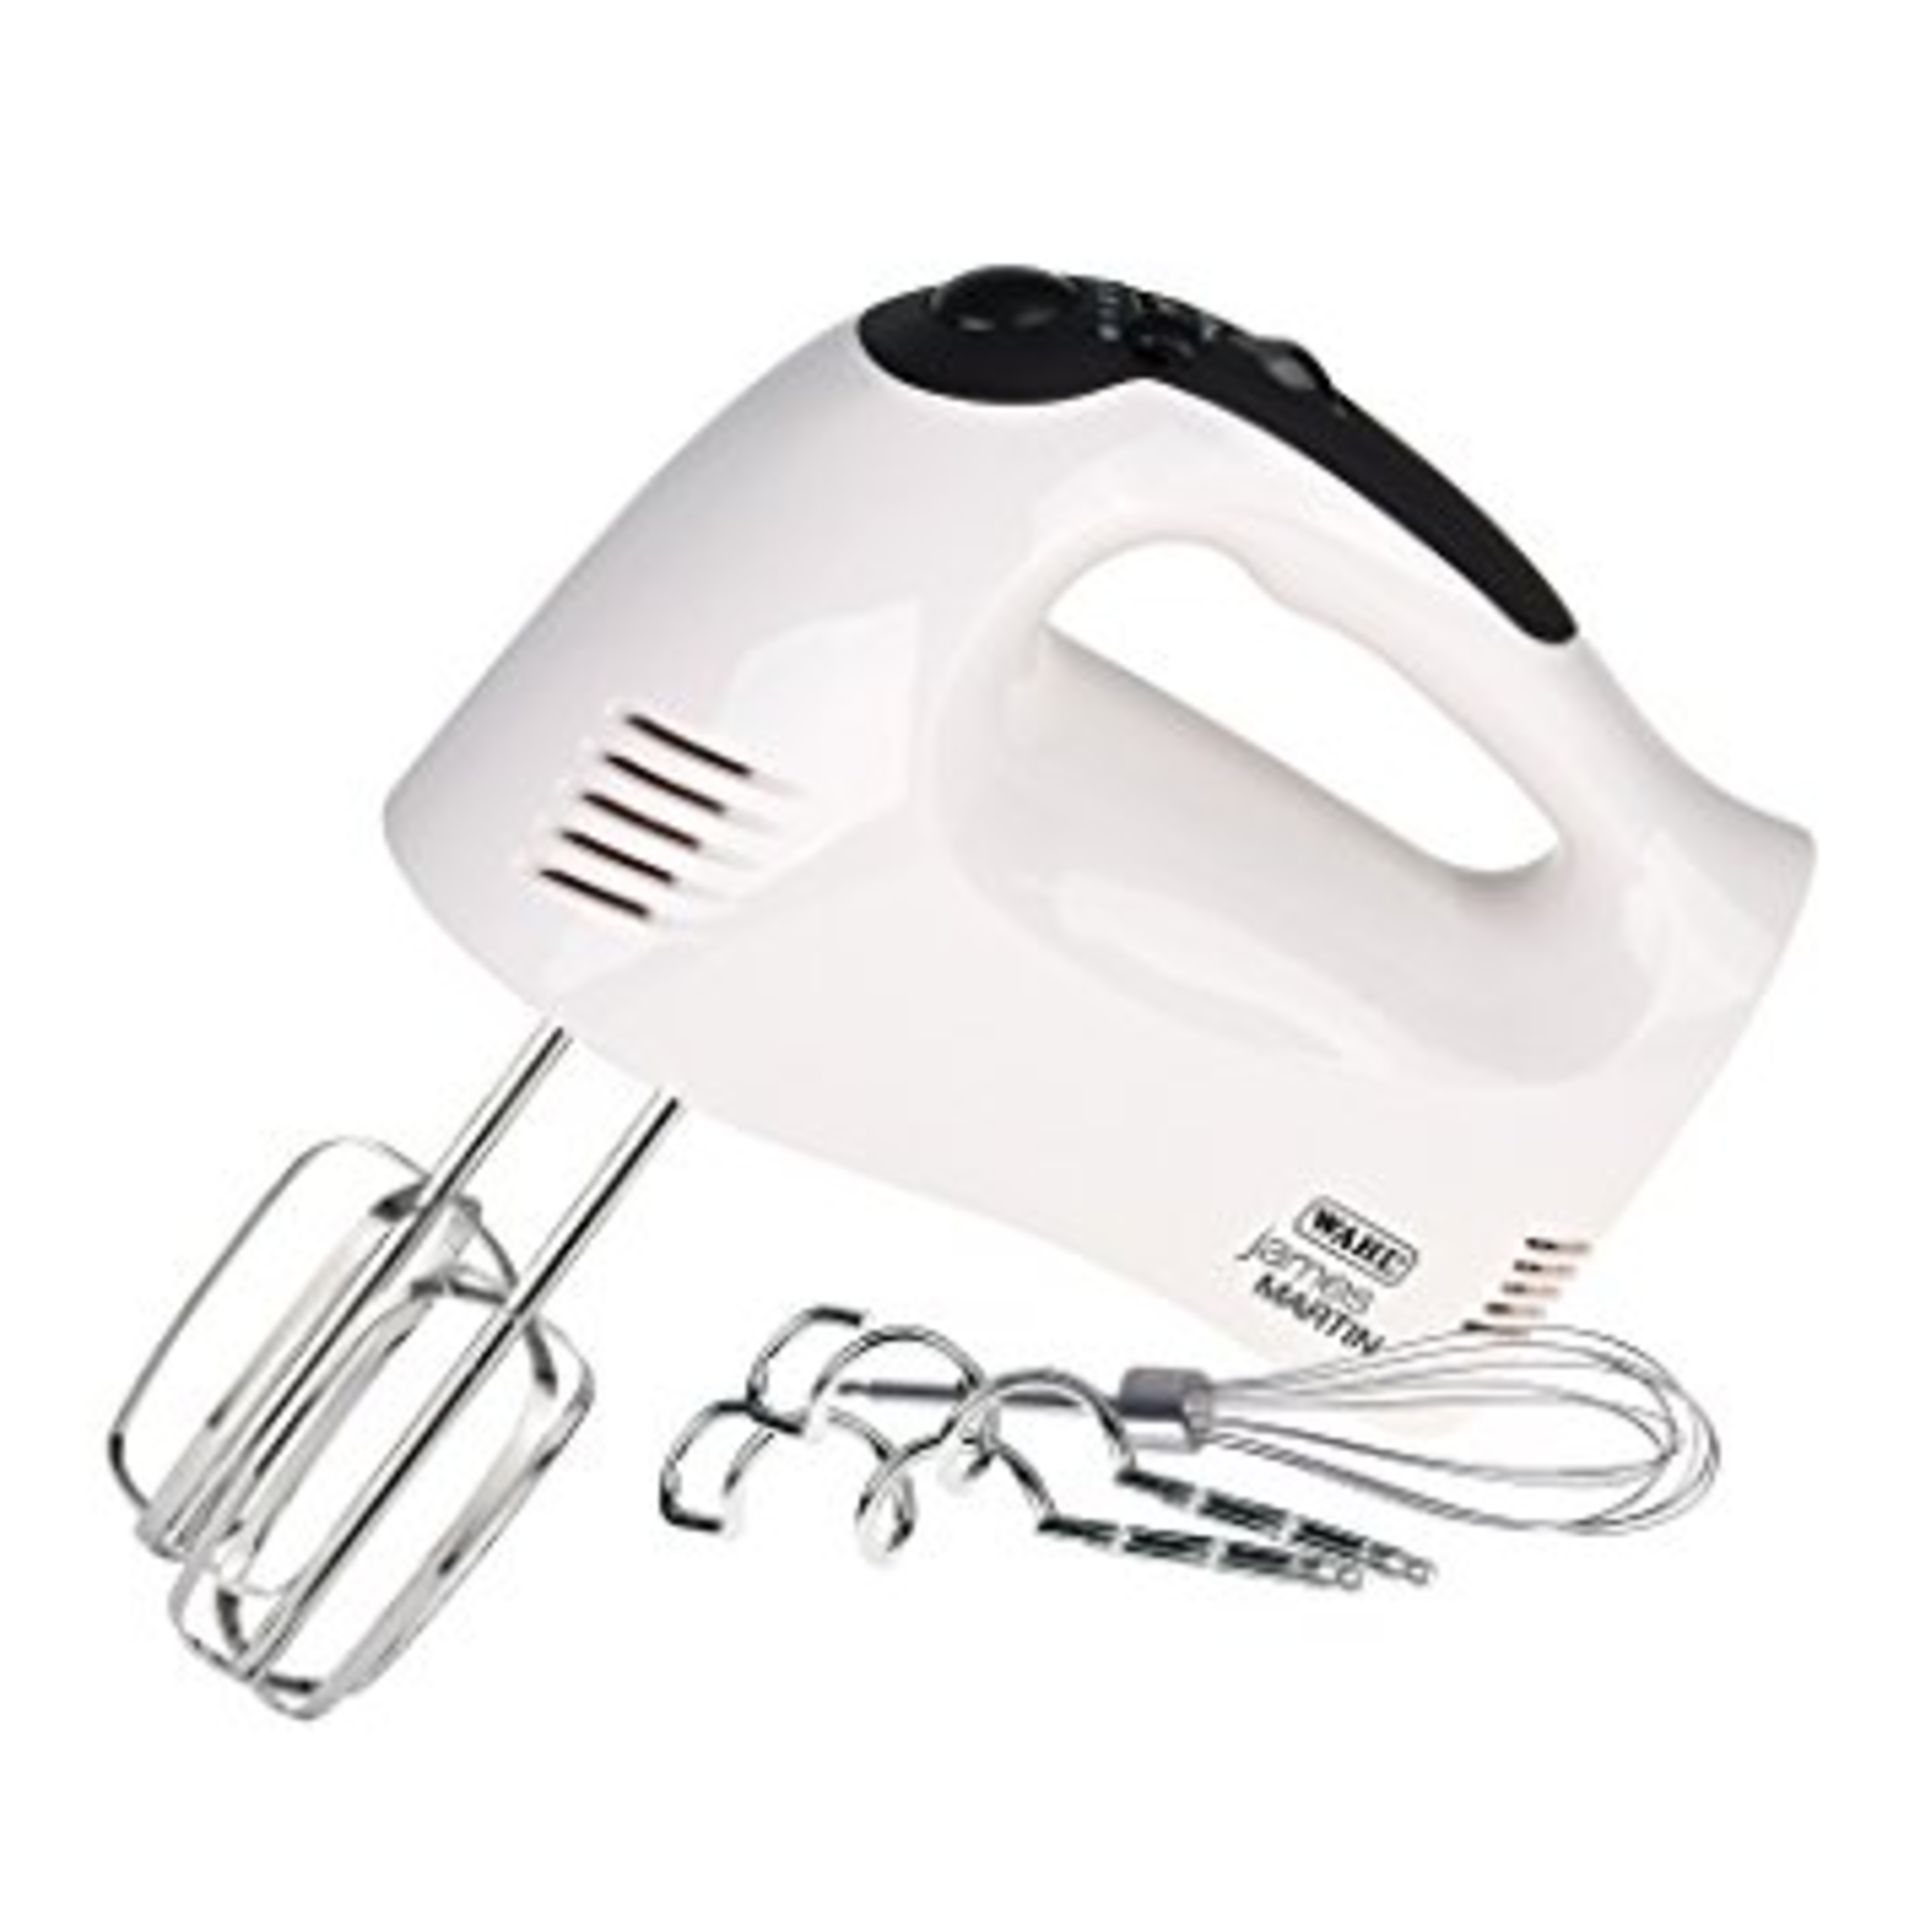 V *TRADE QTY* Brand New 300W Hand Mixer with 5 Speeds and Turbo Function and Long Beaters and